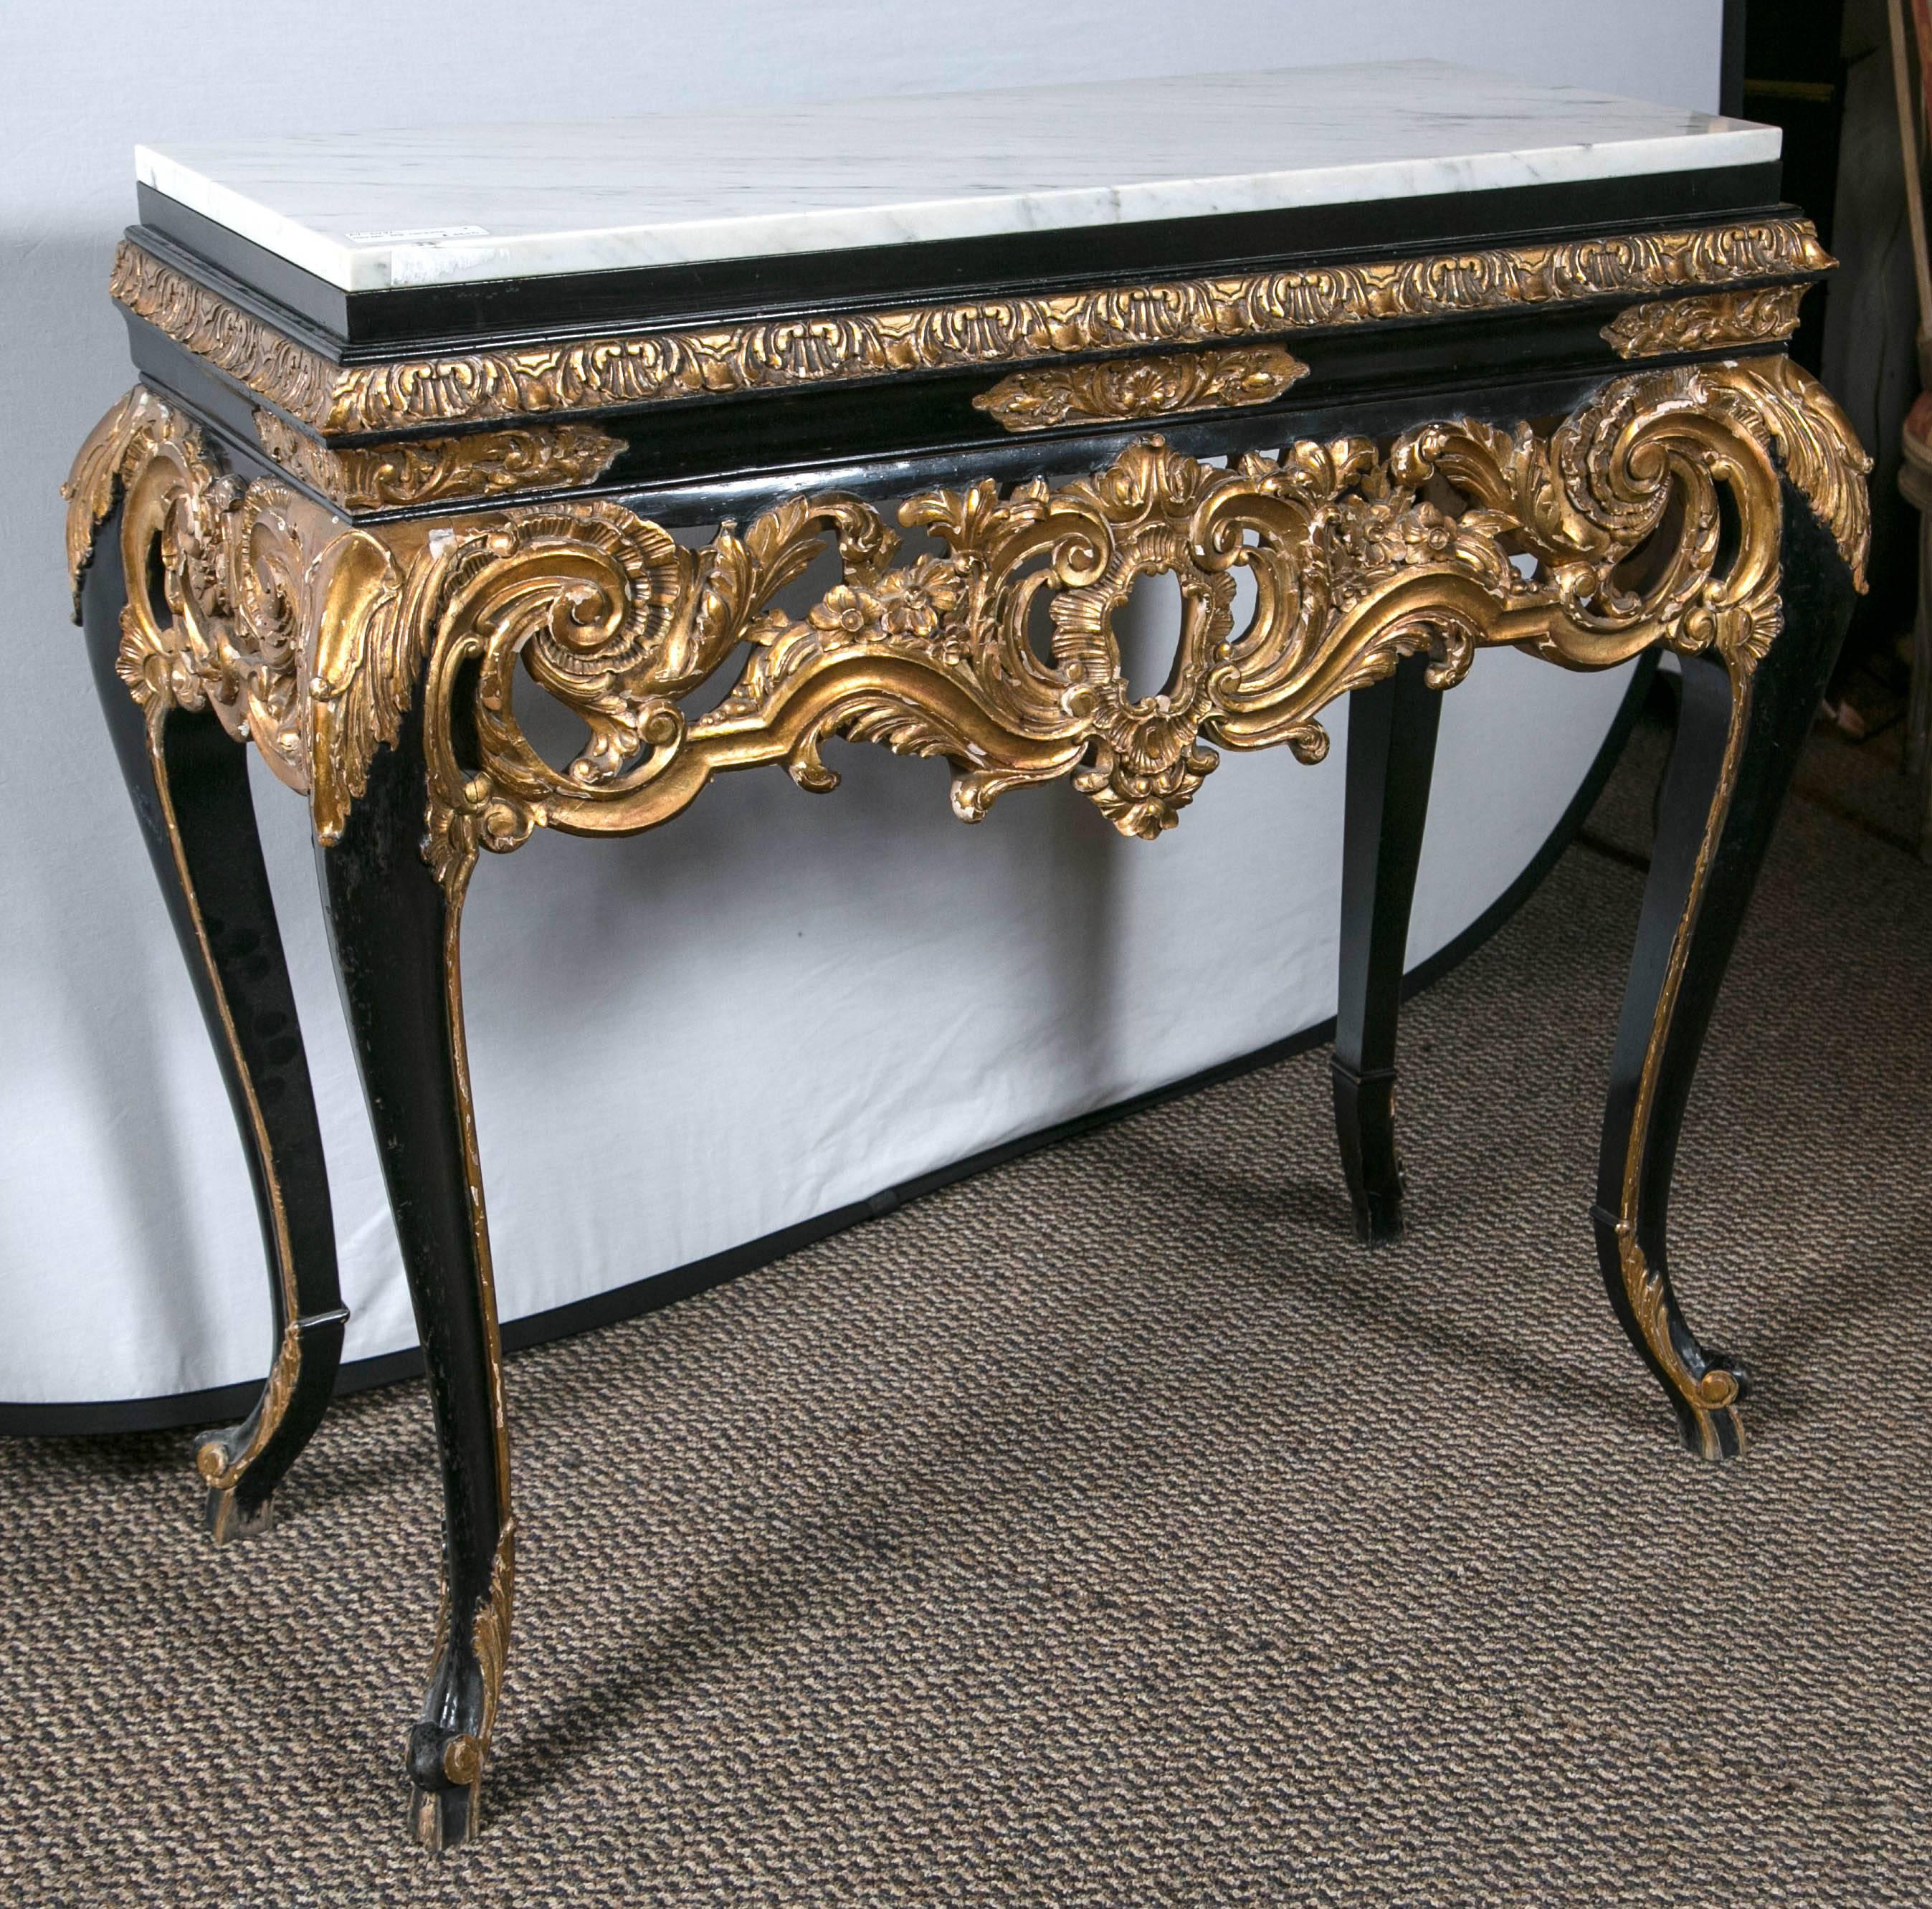 A fine gilt and ebony decorated marble-top console. This console has an elaborately carved skirt. A great and rare size. The petite console has elaborate detail fit for a grand room. The exquisiteness of the broad top leg that begins in a Louis XV